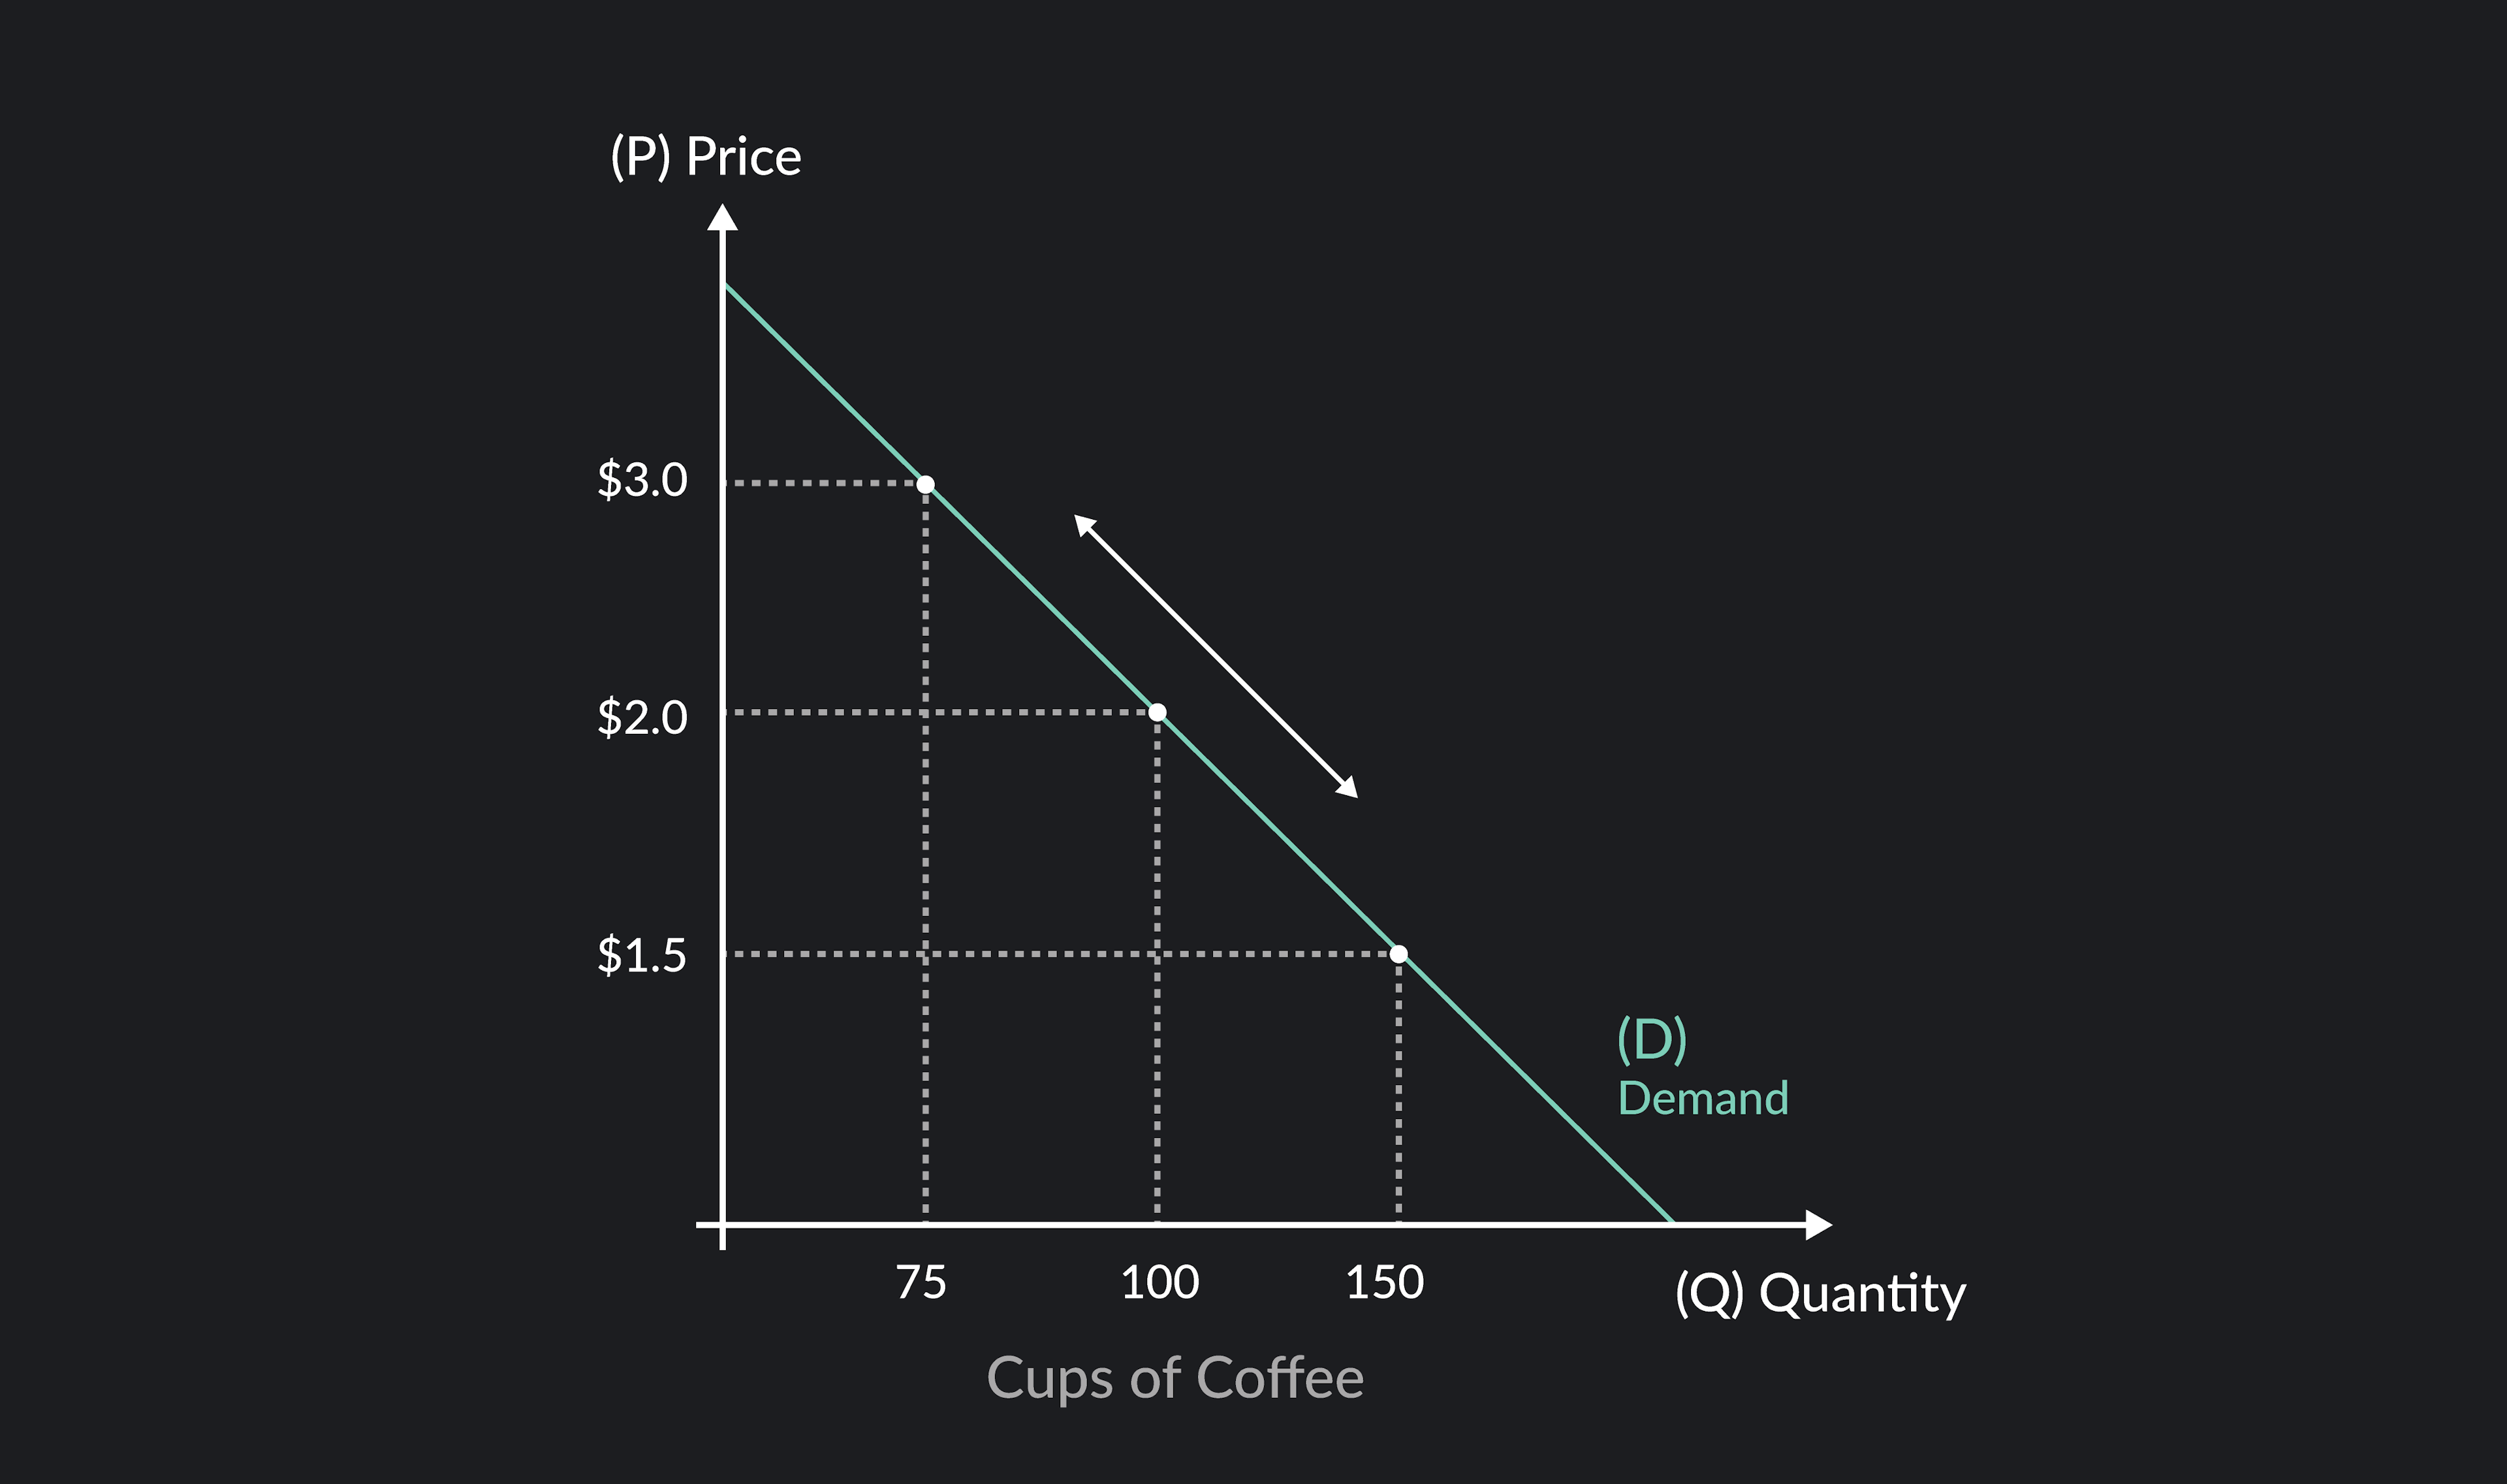 Graph showing movement along Demand Curve based on price changed